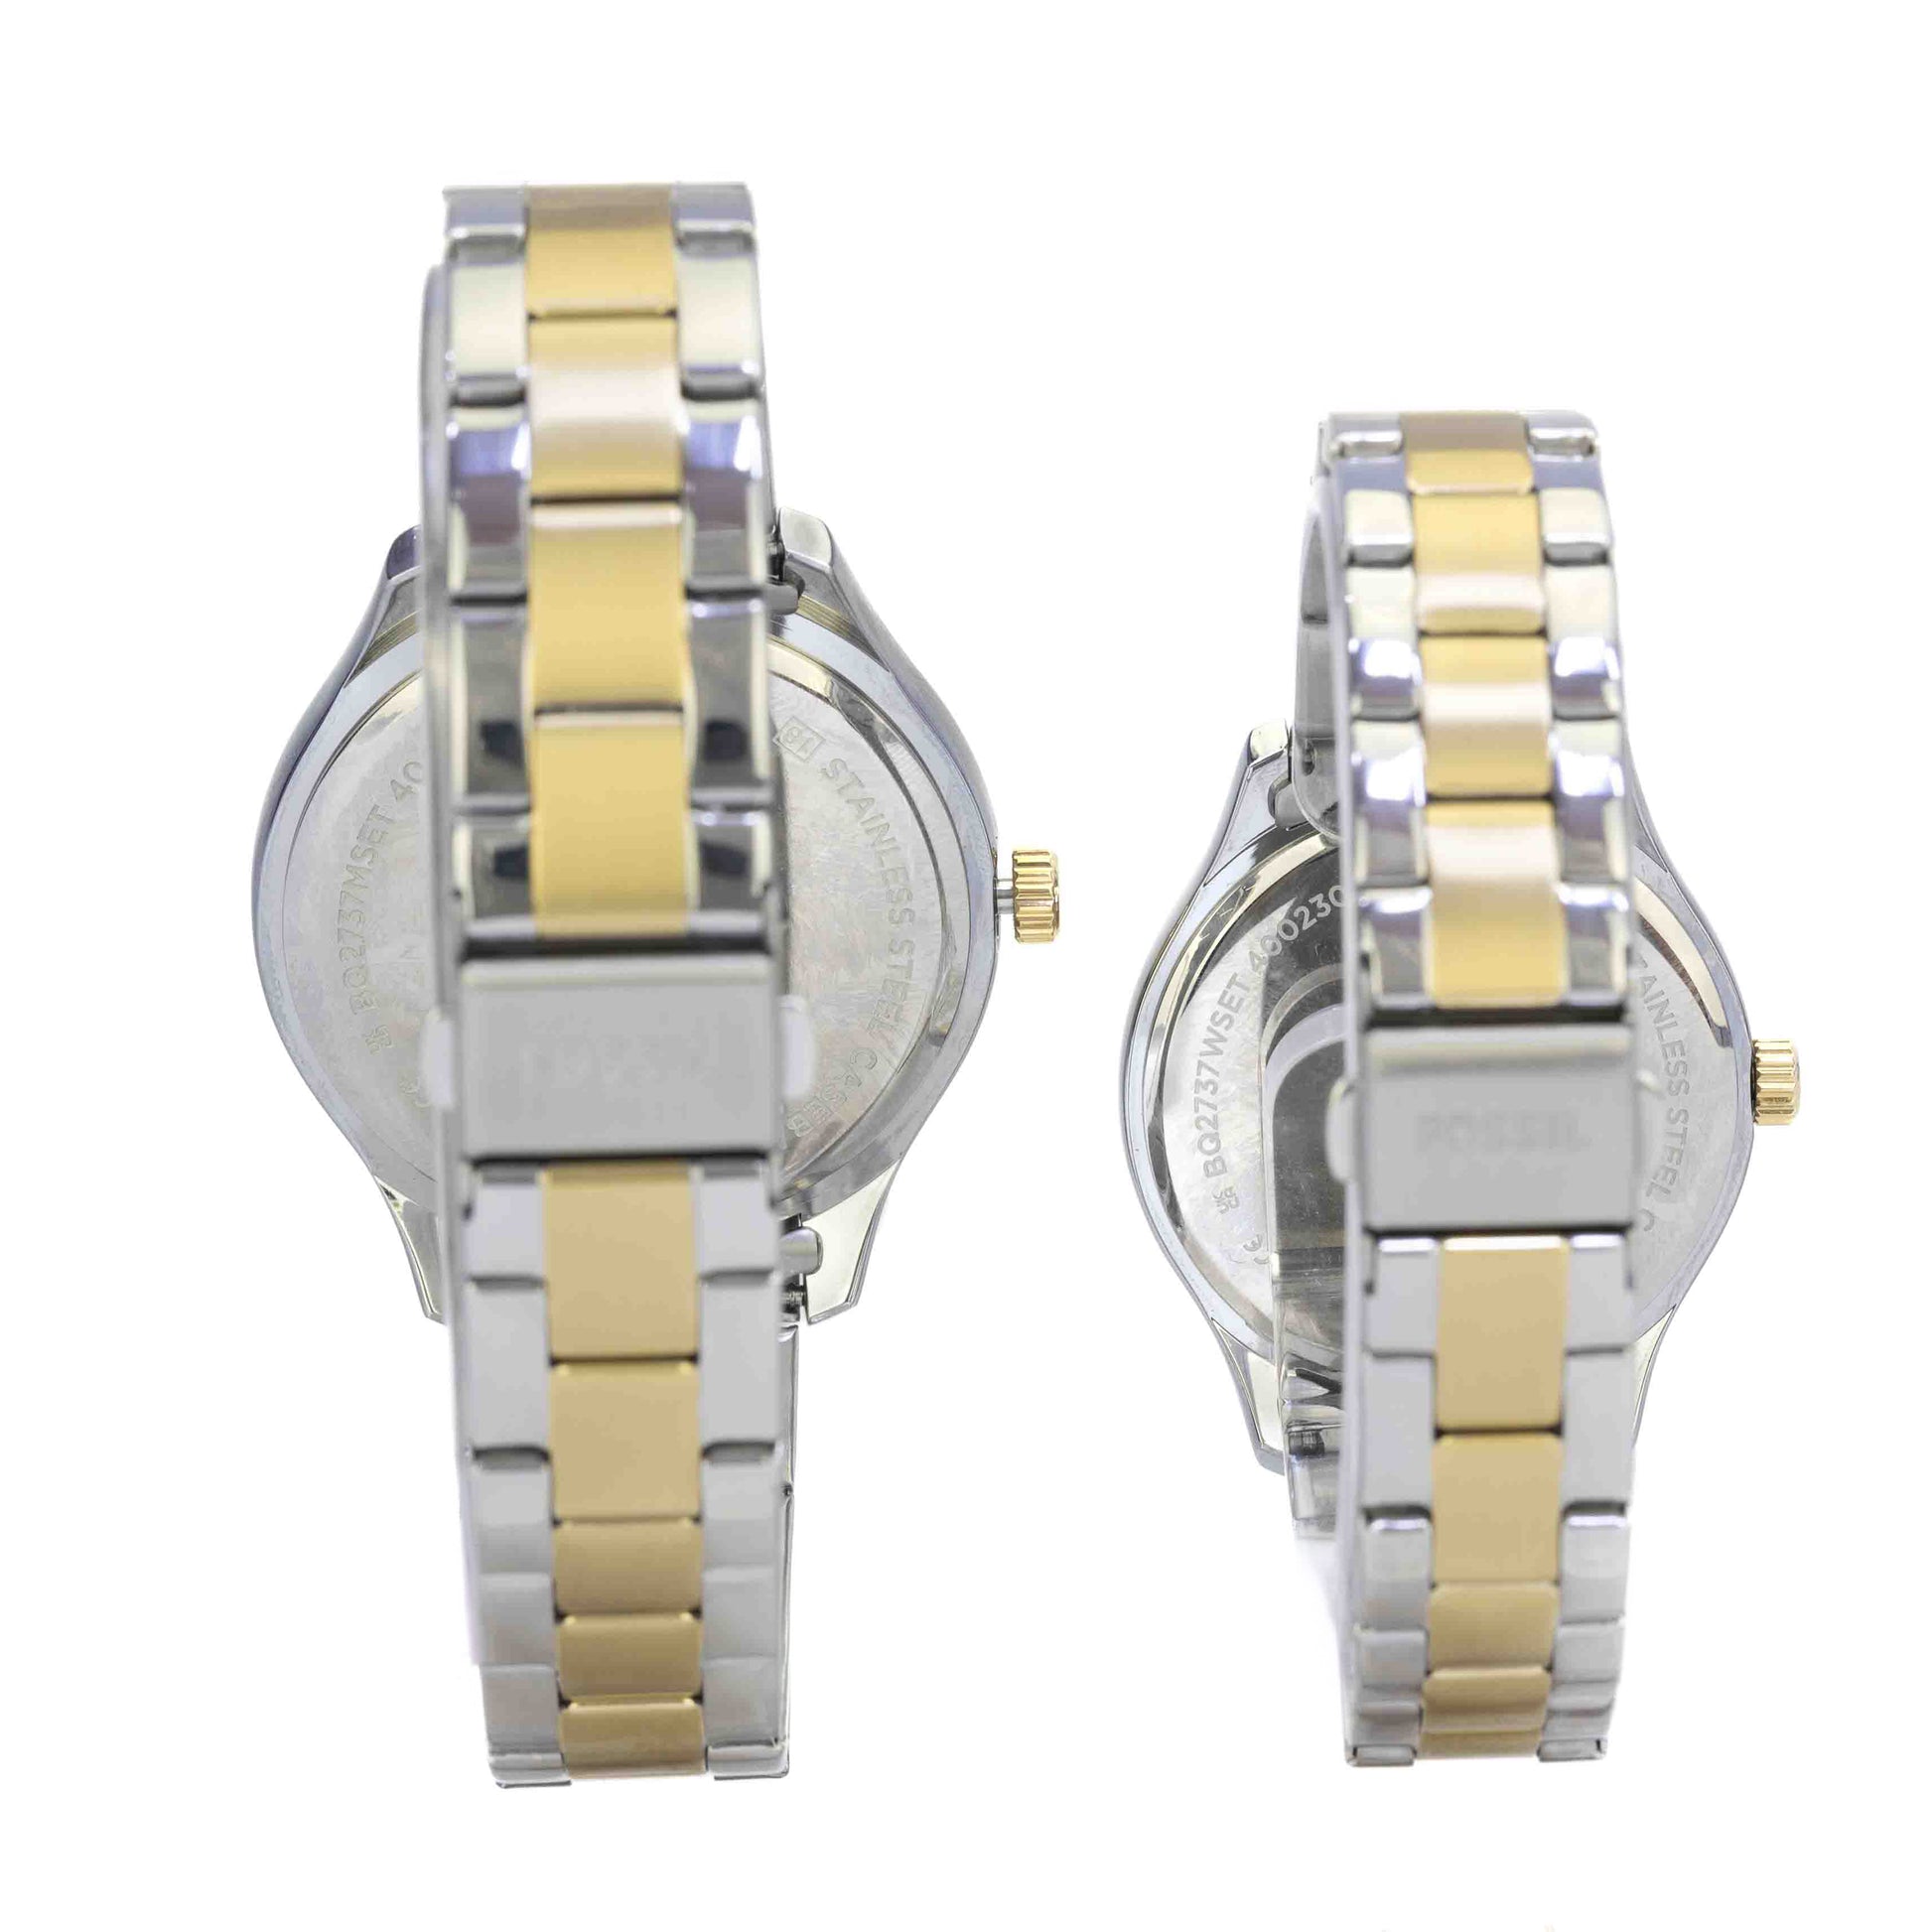 Fossil His and Hers Multifunction Two-Tone Stainless Steel Watch Set - BQ2737SET - 796483593534